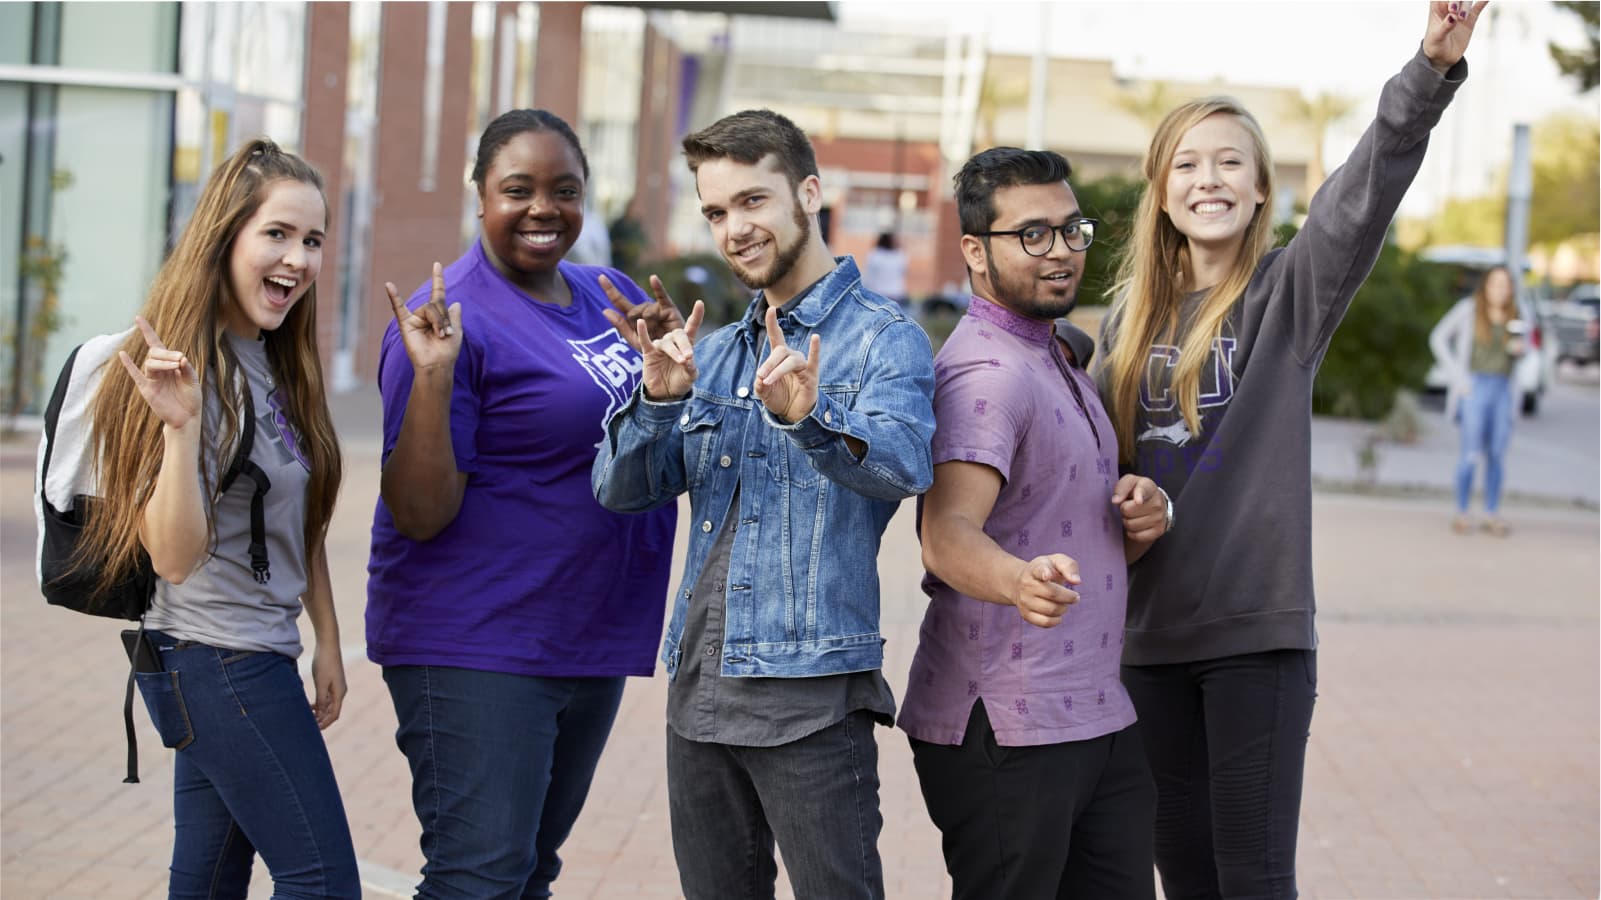 Enthusiastic group of GCU students pose with lopes up hand symbols